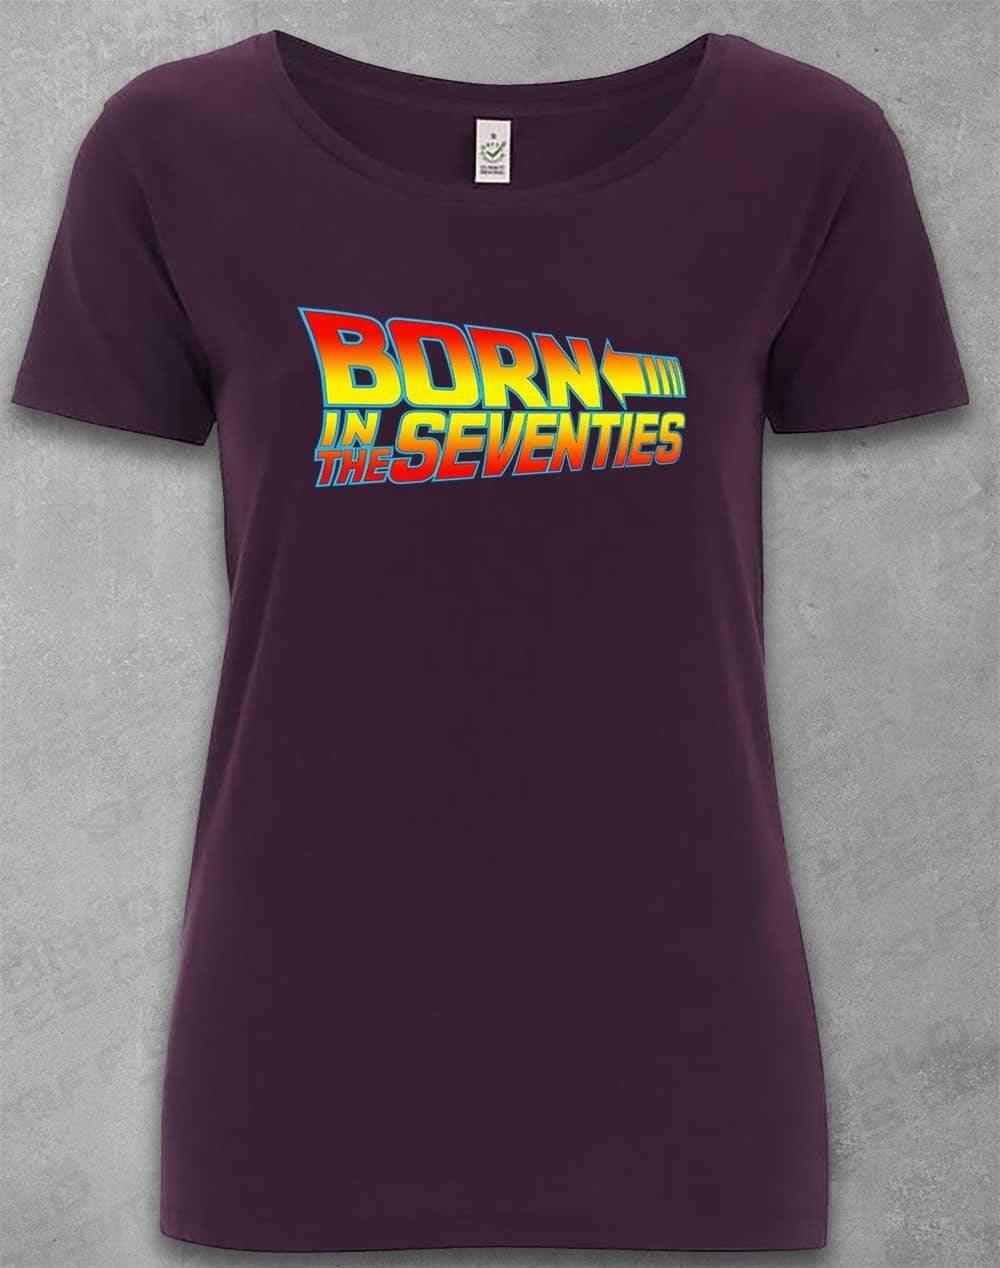 DELUXE Born in the... (CHOOSE YOUR DECADE!) Organic Scoop Neck T-Shirt 1970s - Eggplant / 8-10  - Off World Tees